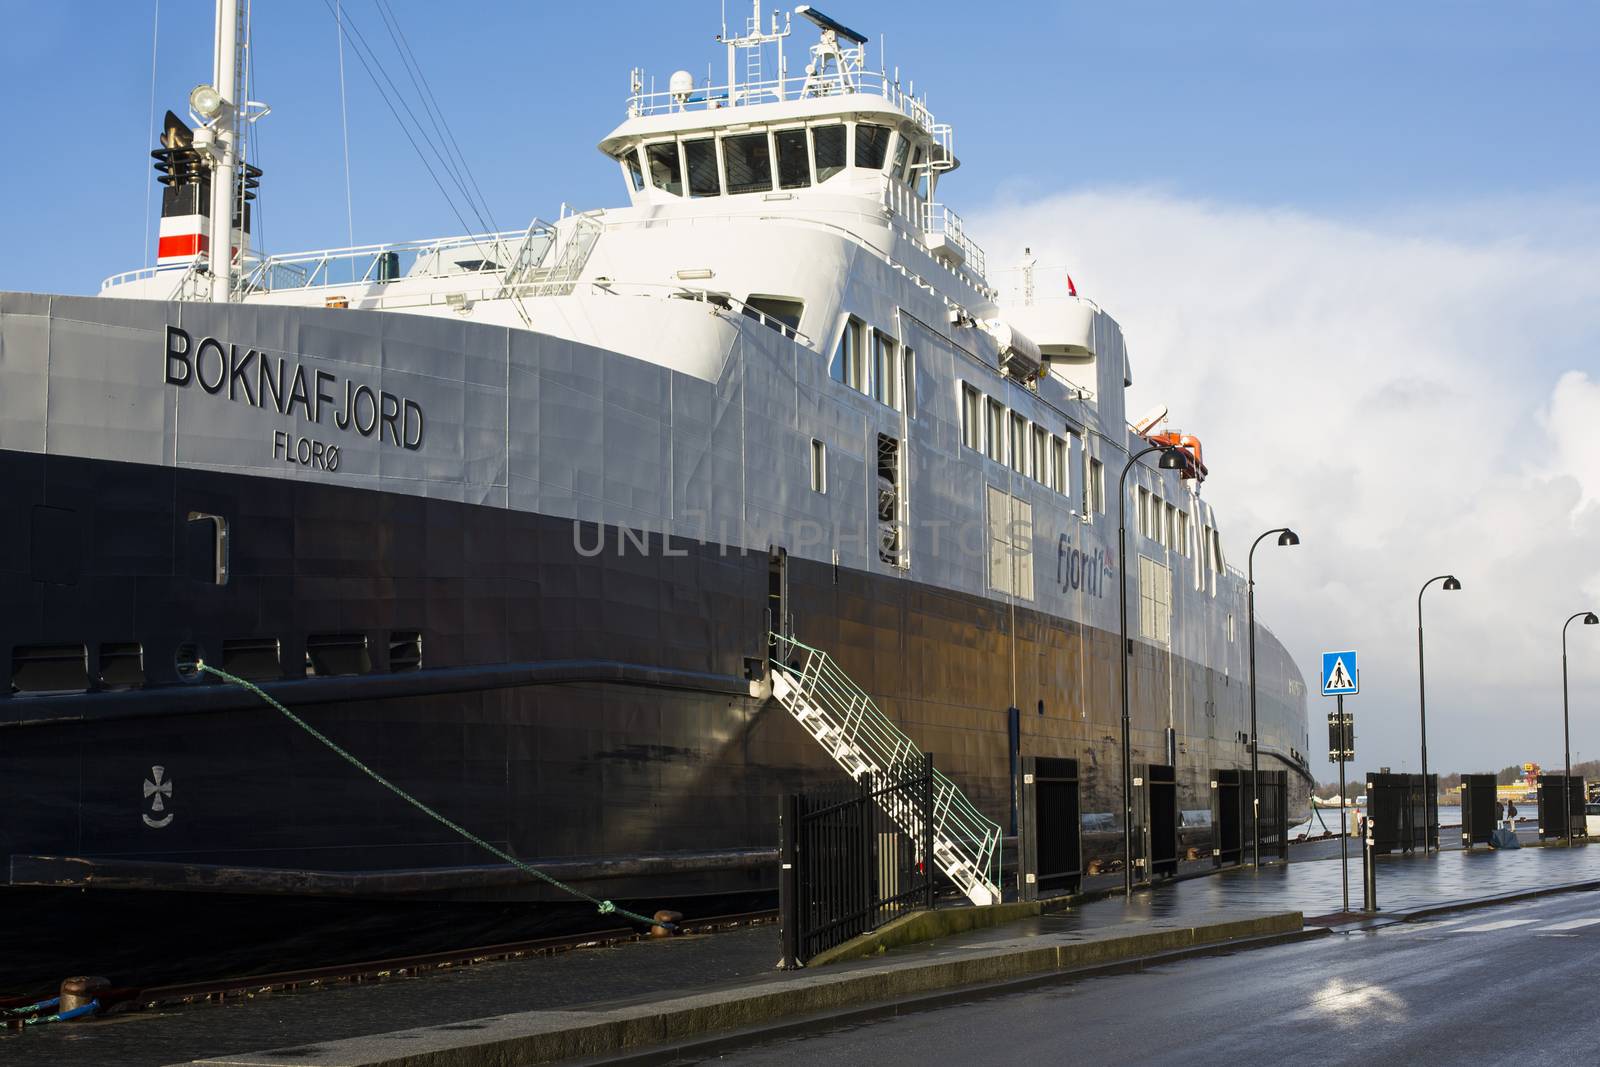 The Boknafjord Car Ferry Tied up and Moored in the Port of Stavanger